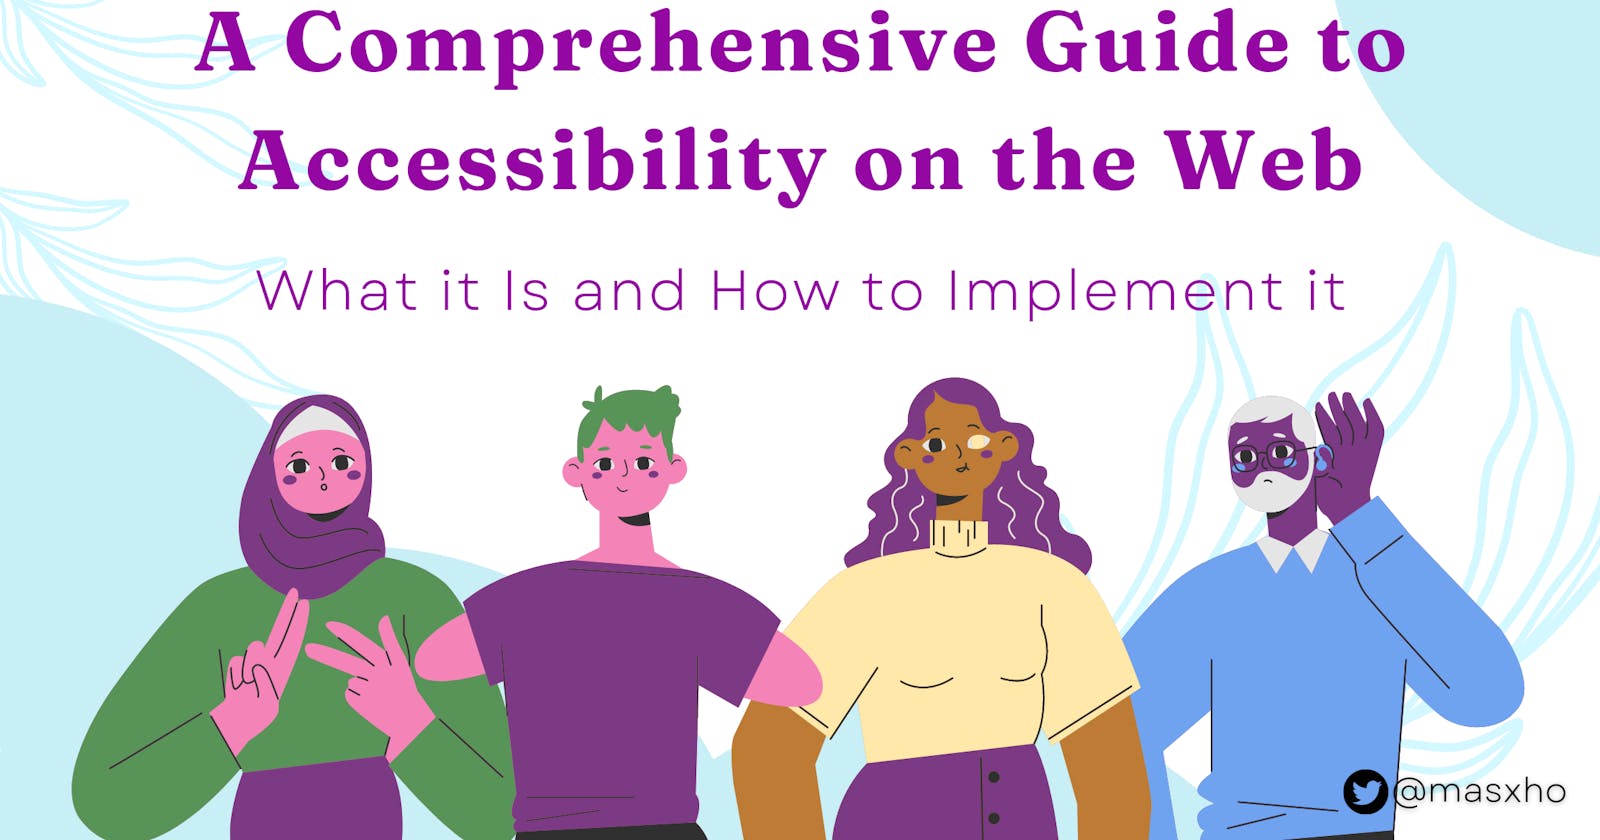 A Comprehensive Guide to Accessibility on the Web